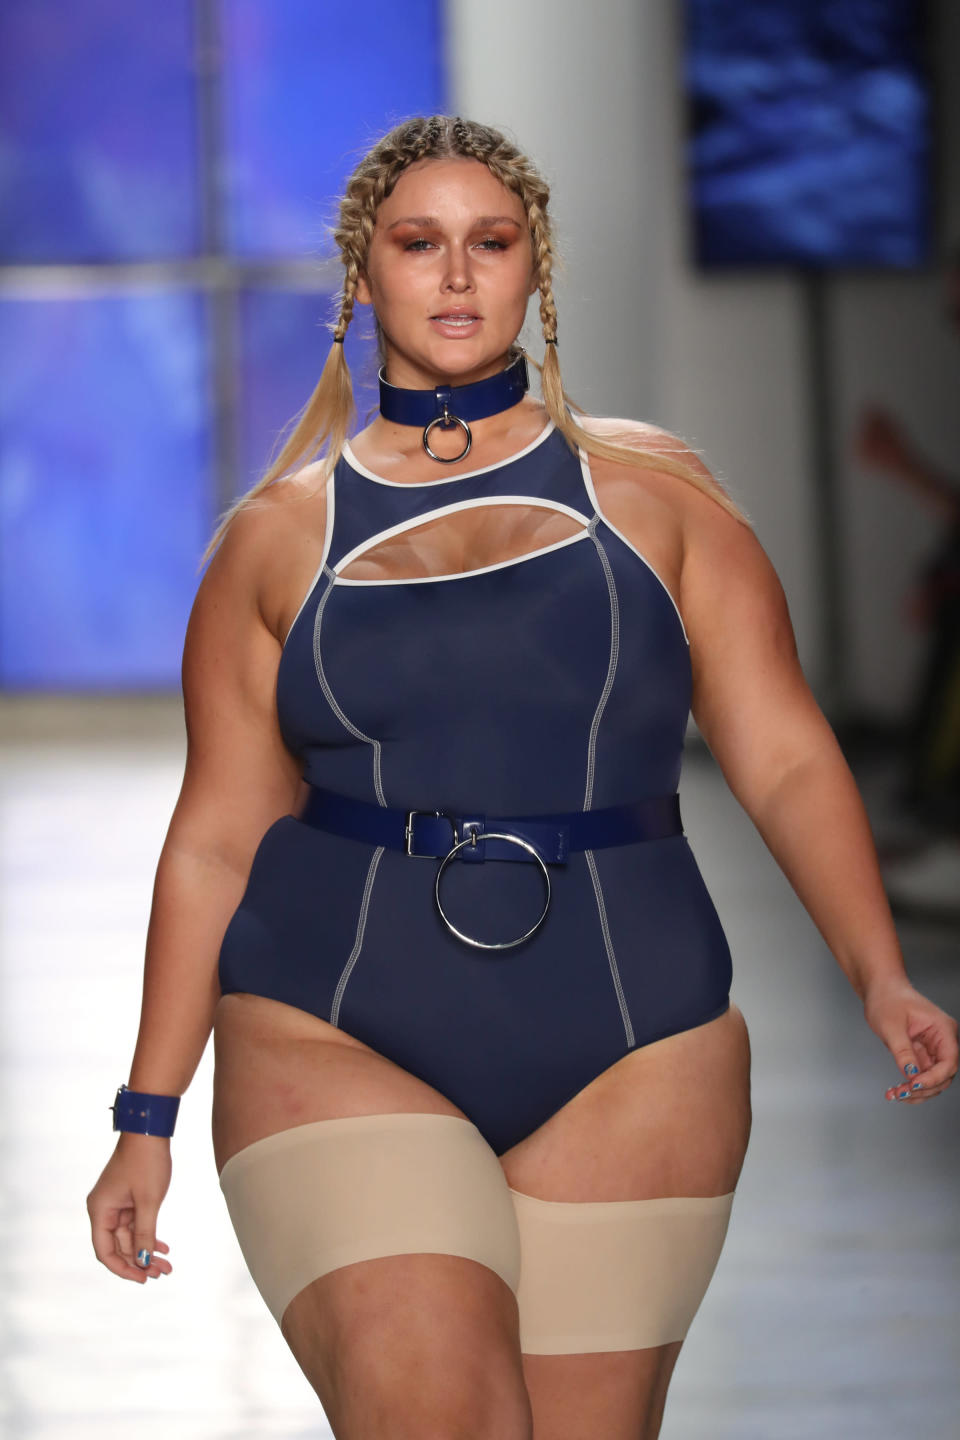 A model sports anti-chafe thigh bands during the Chromat show for New York Fashion Week. (Photo: Getty Images)